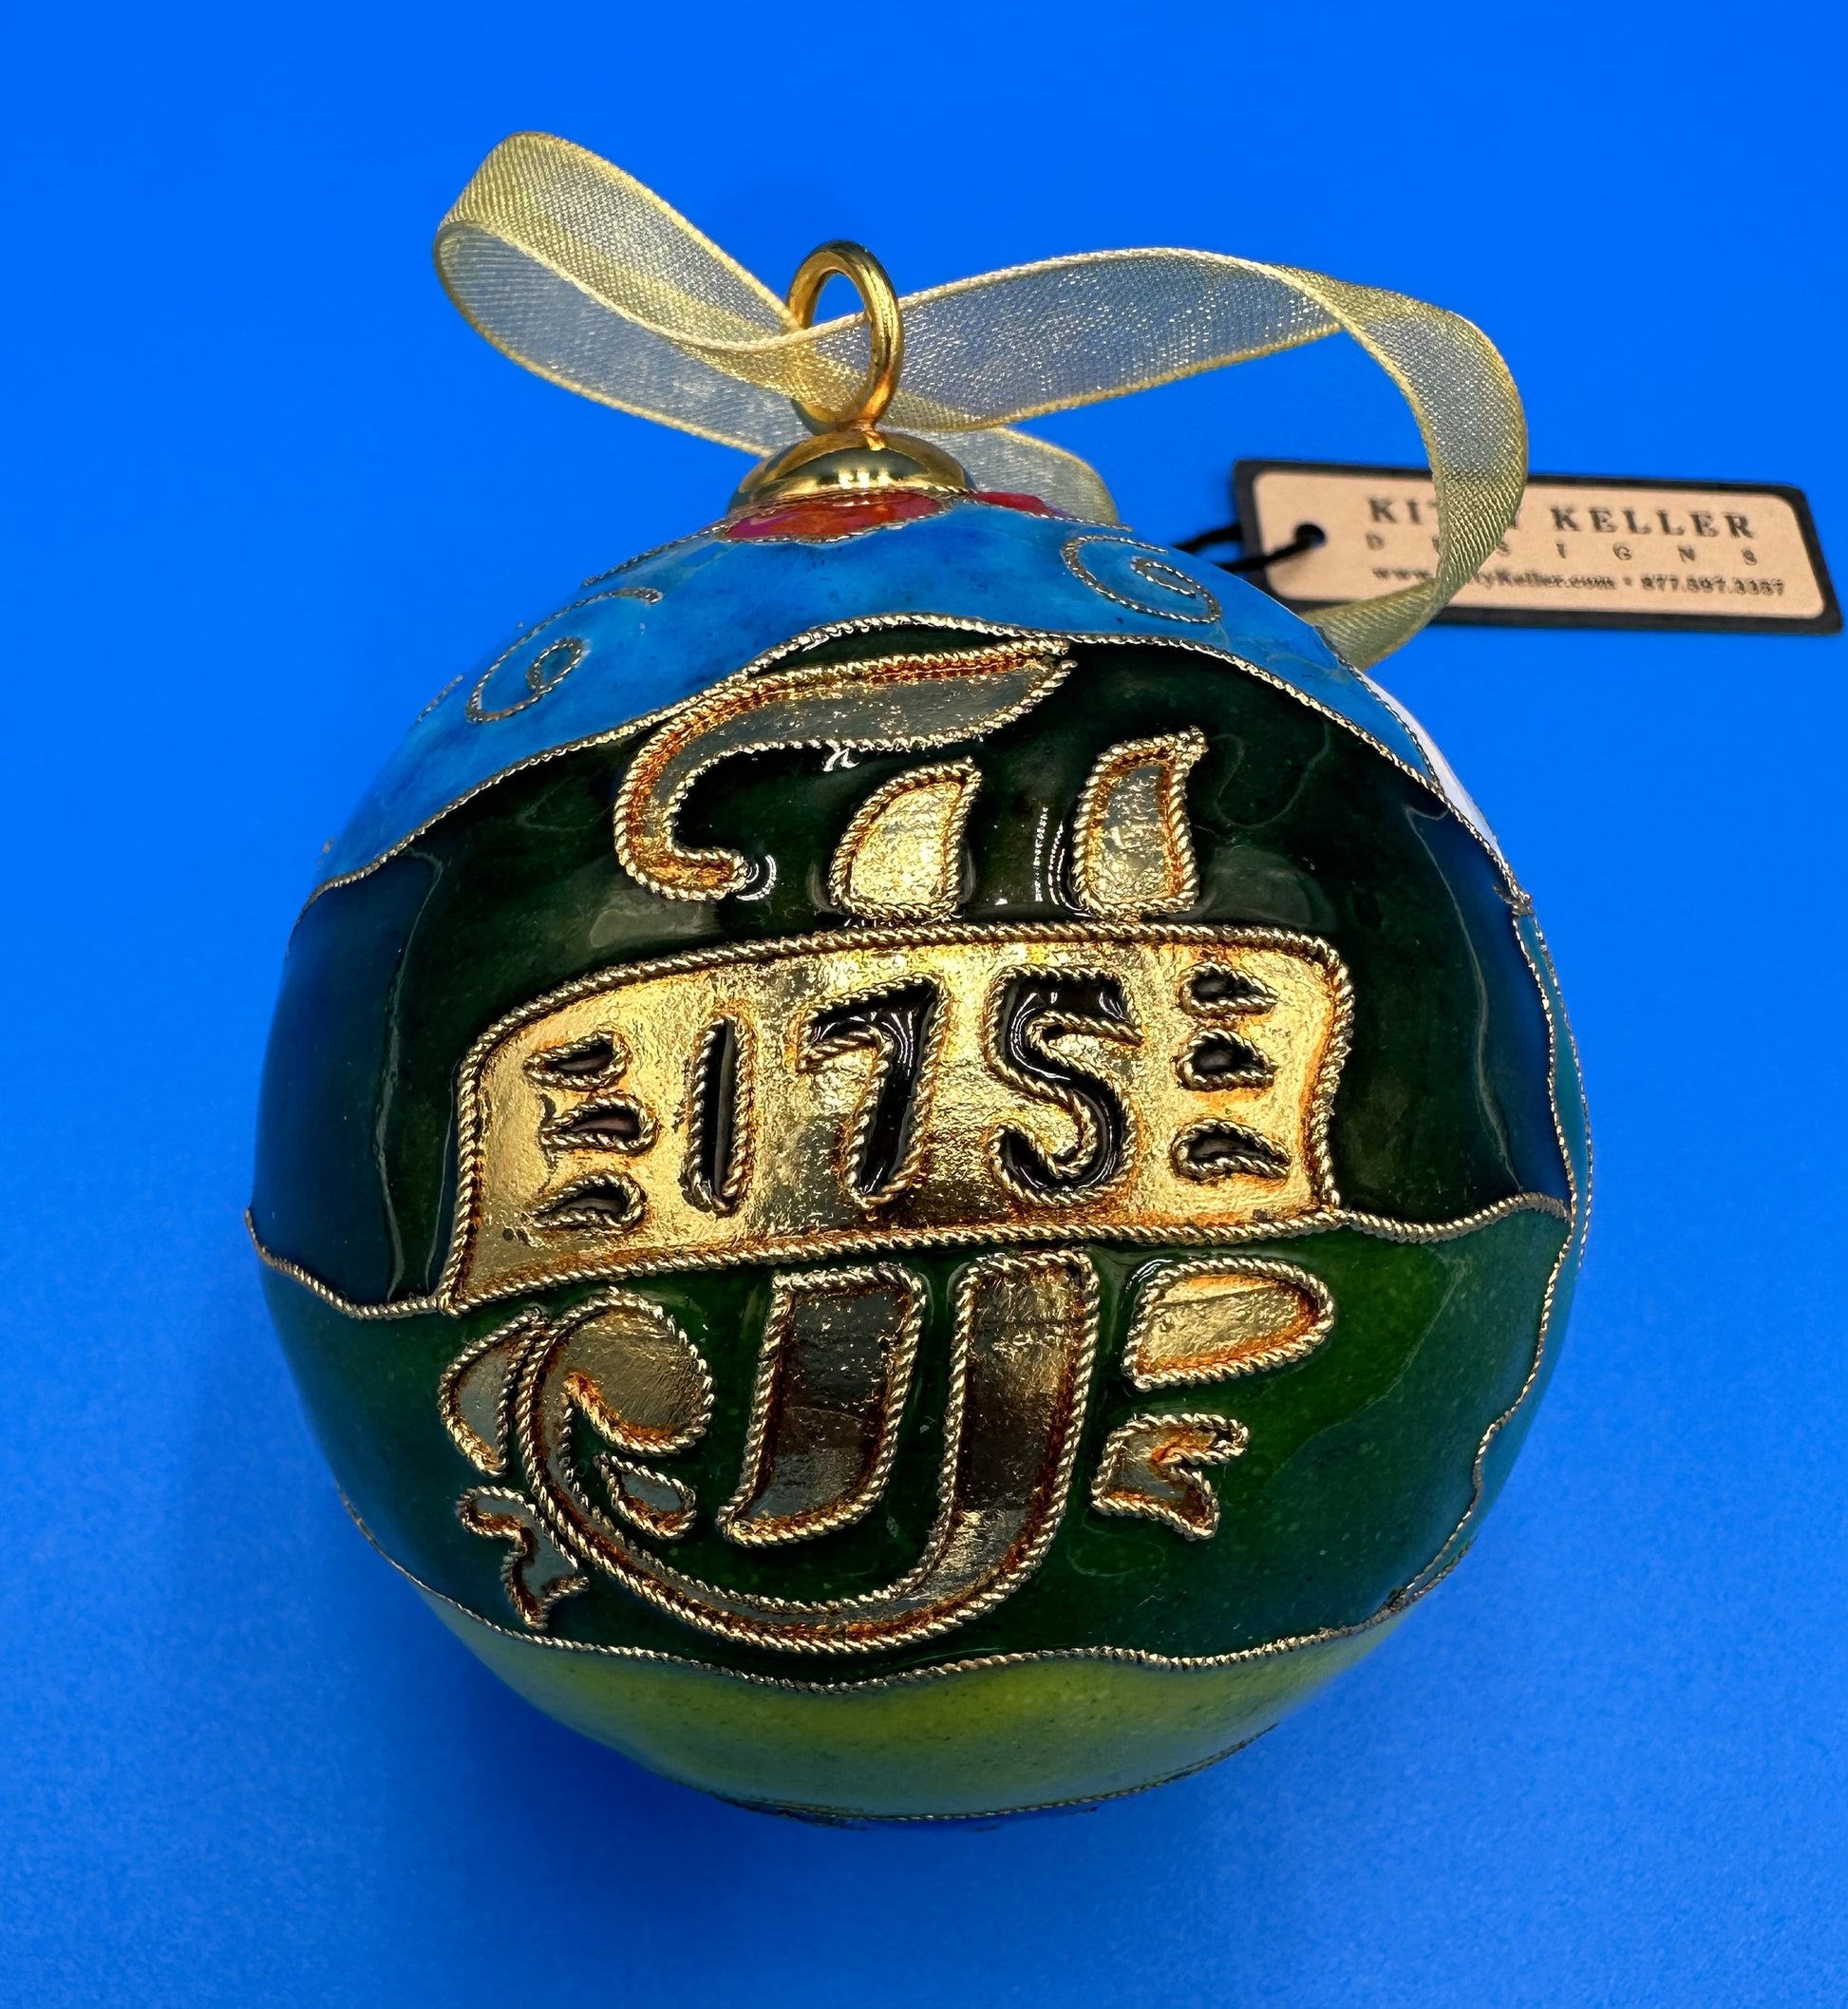 Kitty Keller Designs.  Handmade - Cloisonne' ornament.  Celebrating our 175th year in NOLA!  Features our newest building on campus:  Madonna della Strada.  Comes in a keepsake gift box.  Ornament Stand sold separately.